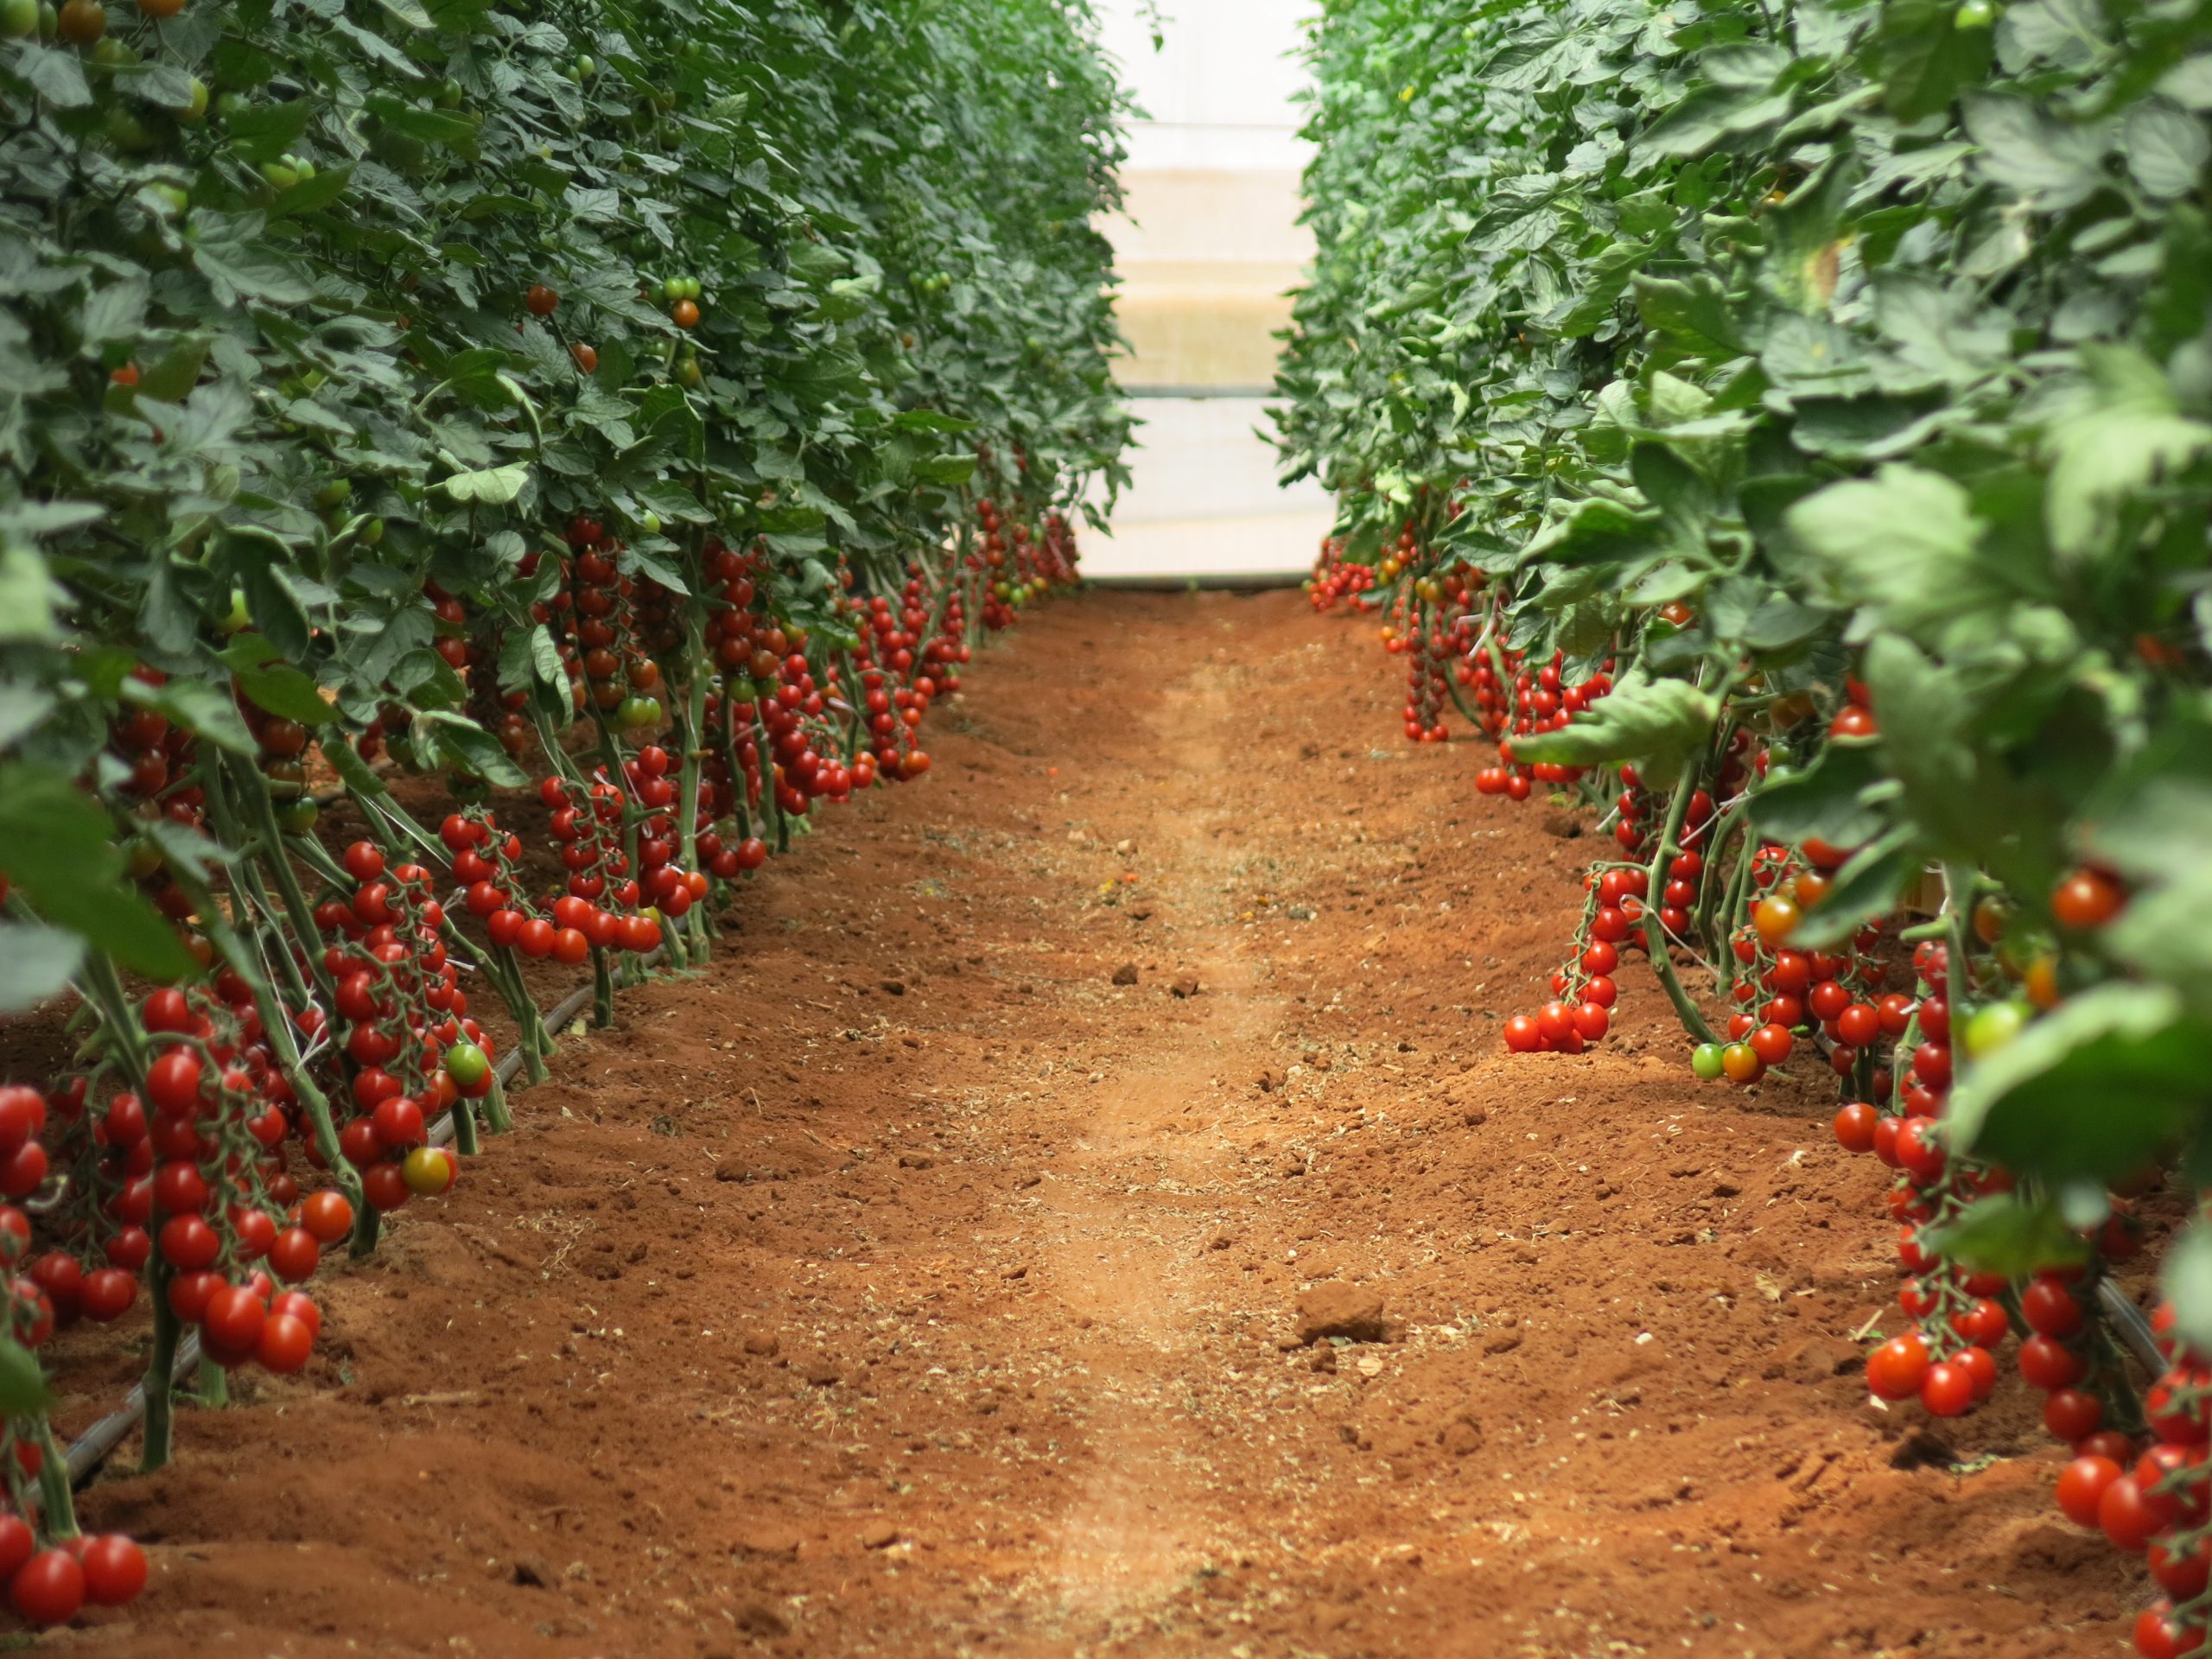 Truss tomatoes are the preferred category and account for 51% of the crop (7,500ha)